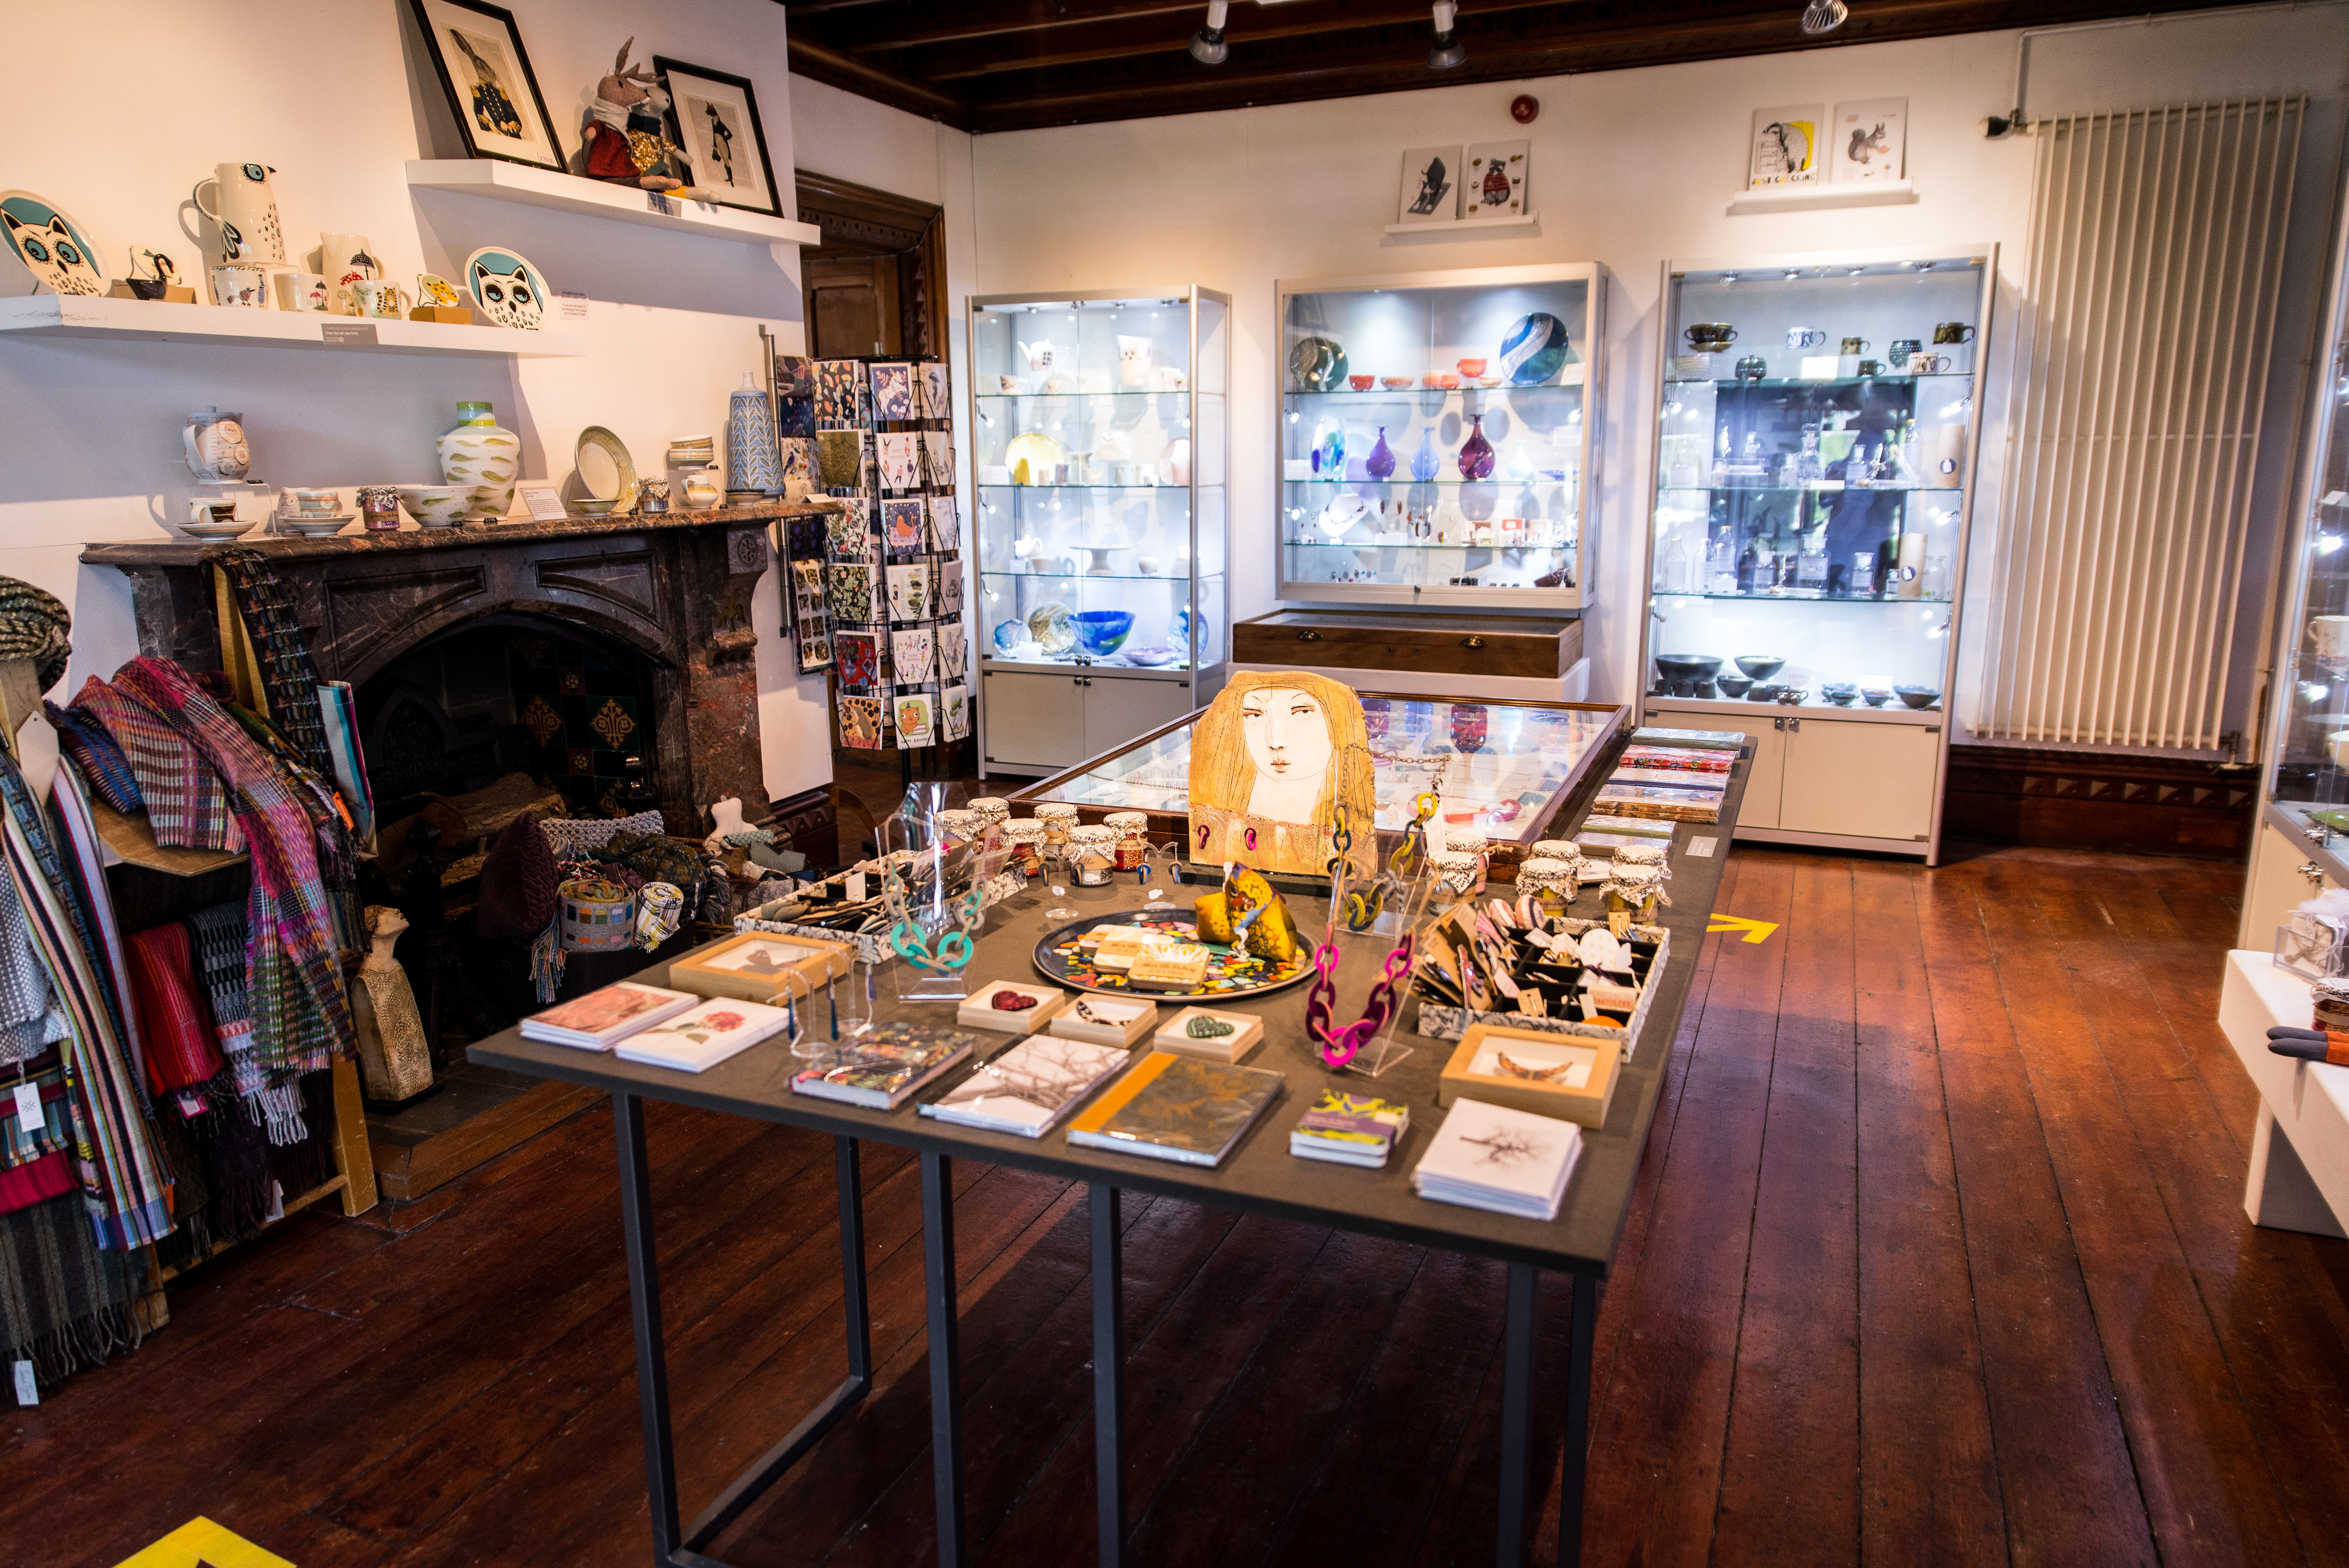 A view of our craft shop which has handmade items in glass cabinets and on tables. It also features an original fireplace and dark wooden floorboards.